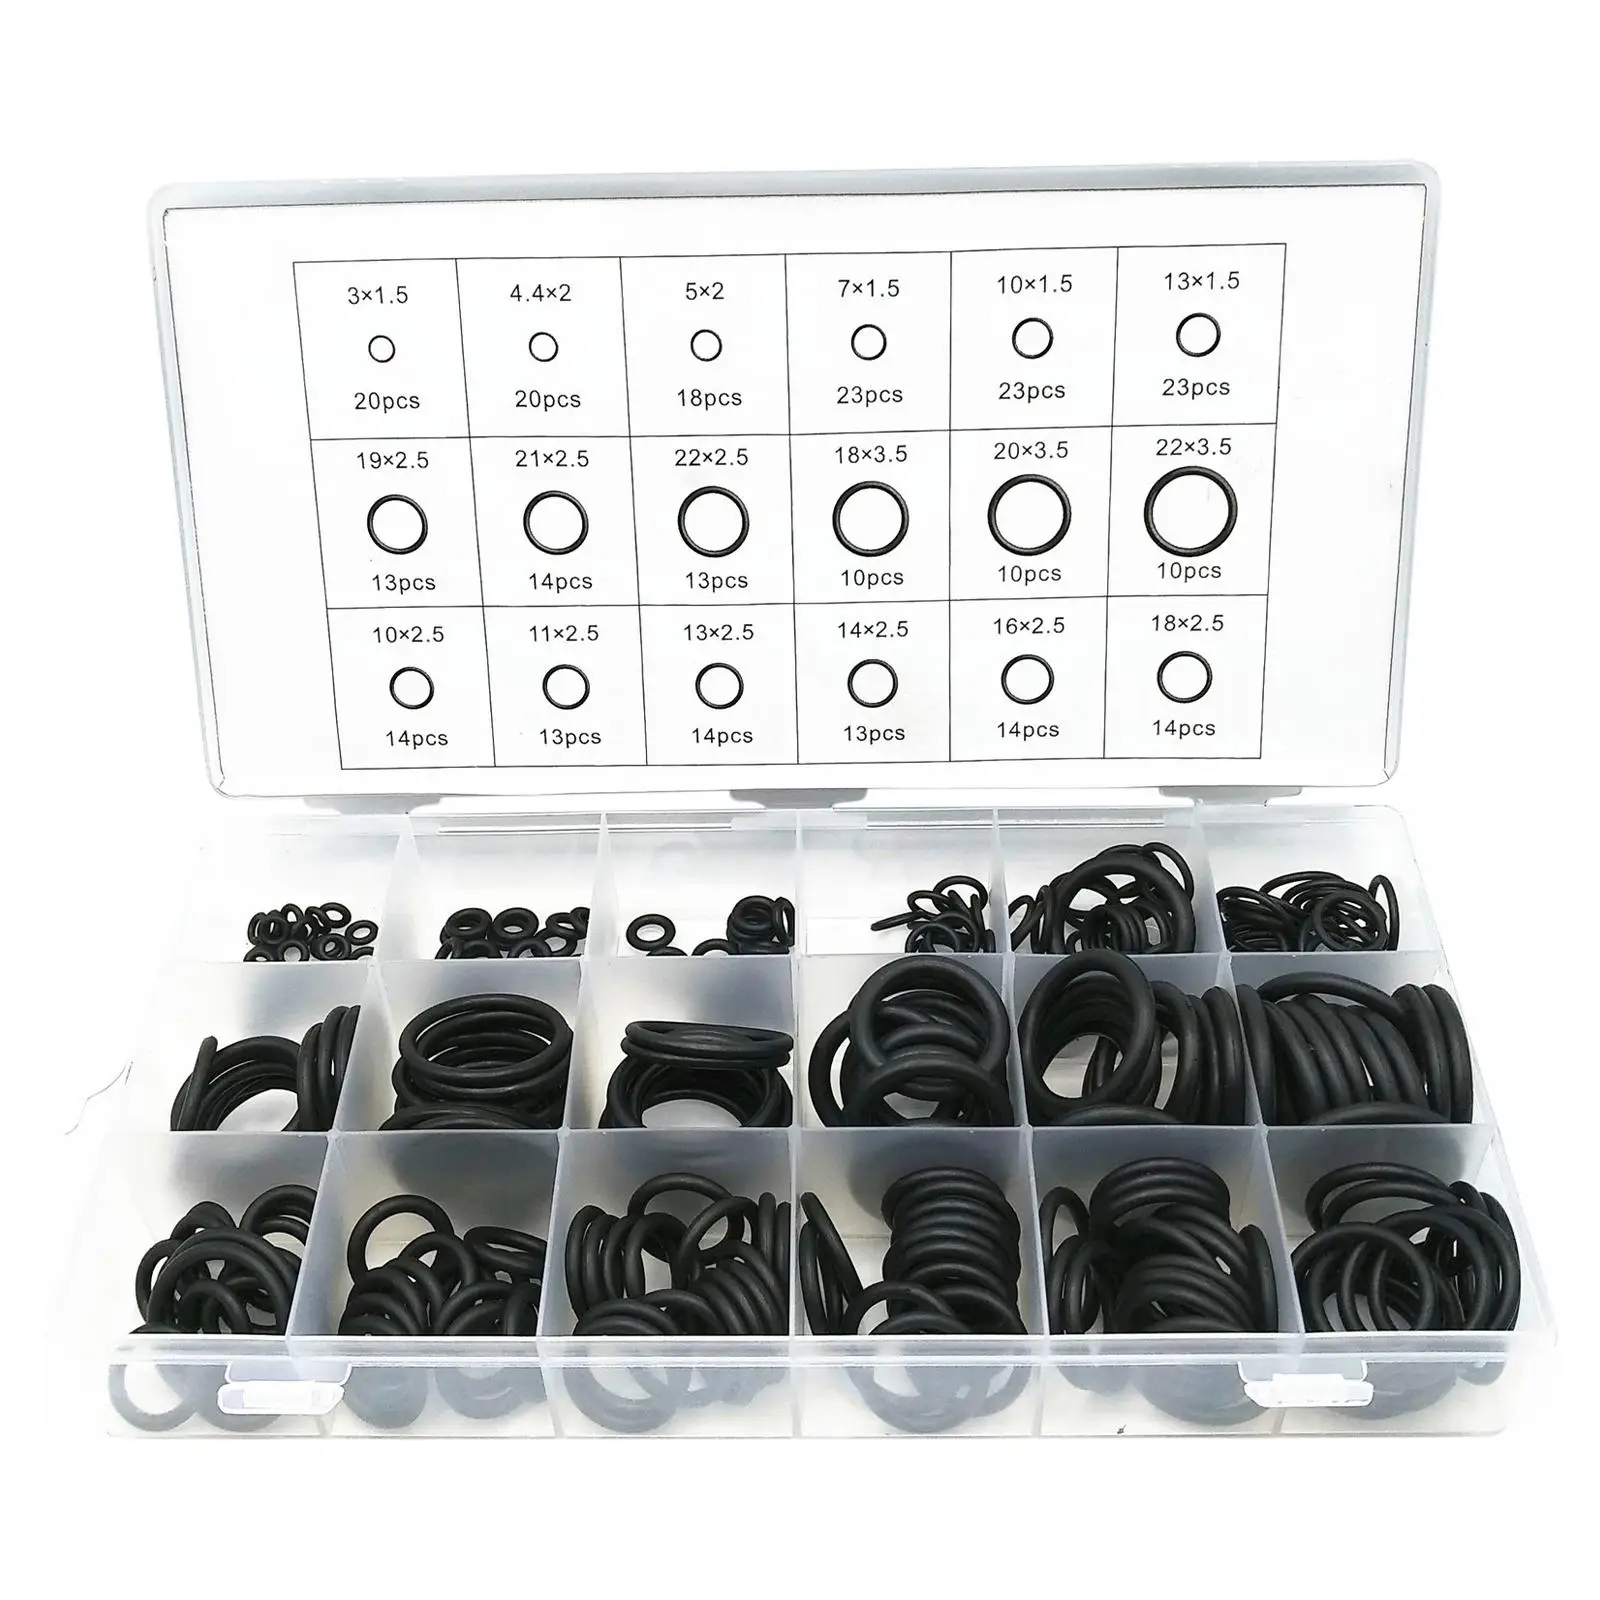 

279x Rubber O 18 Sizes Round Fits for Mechanics Workshop